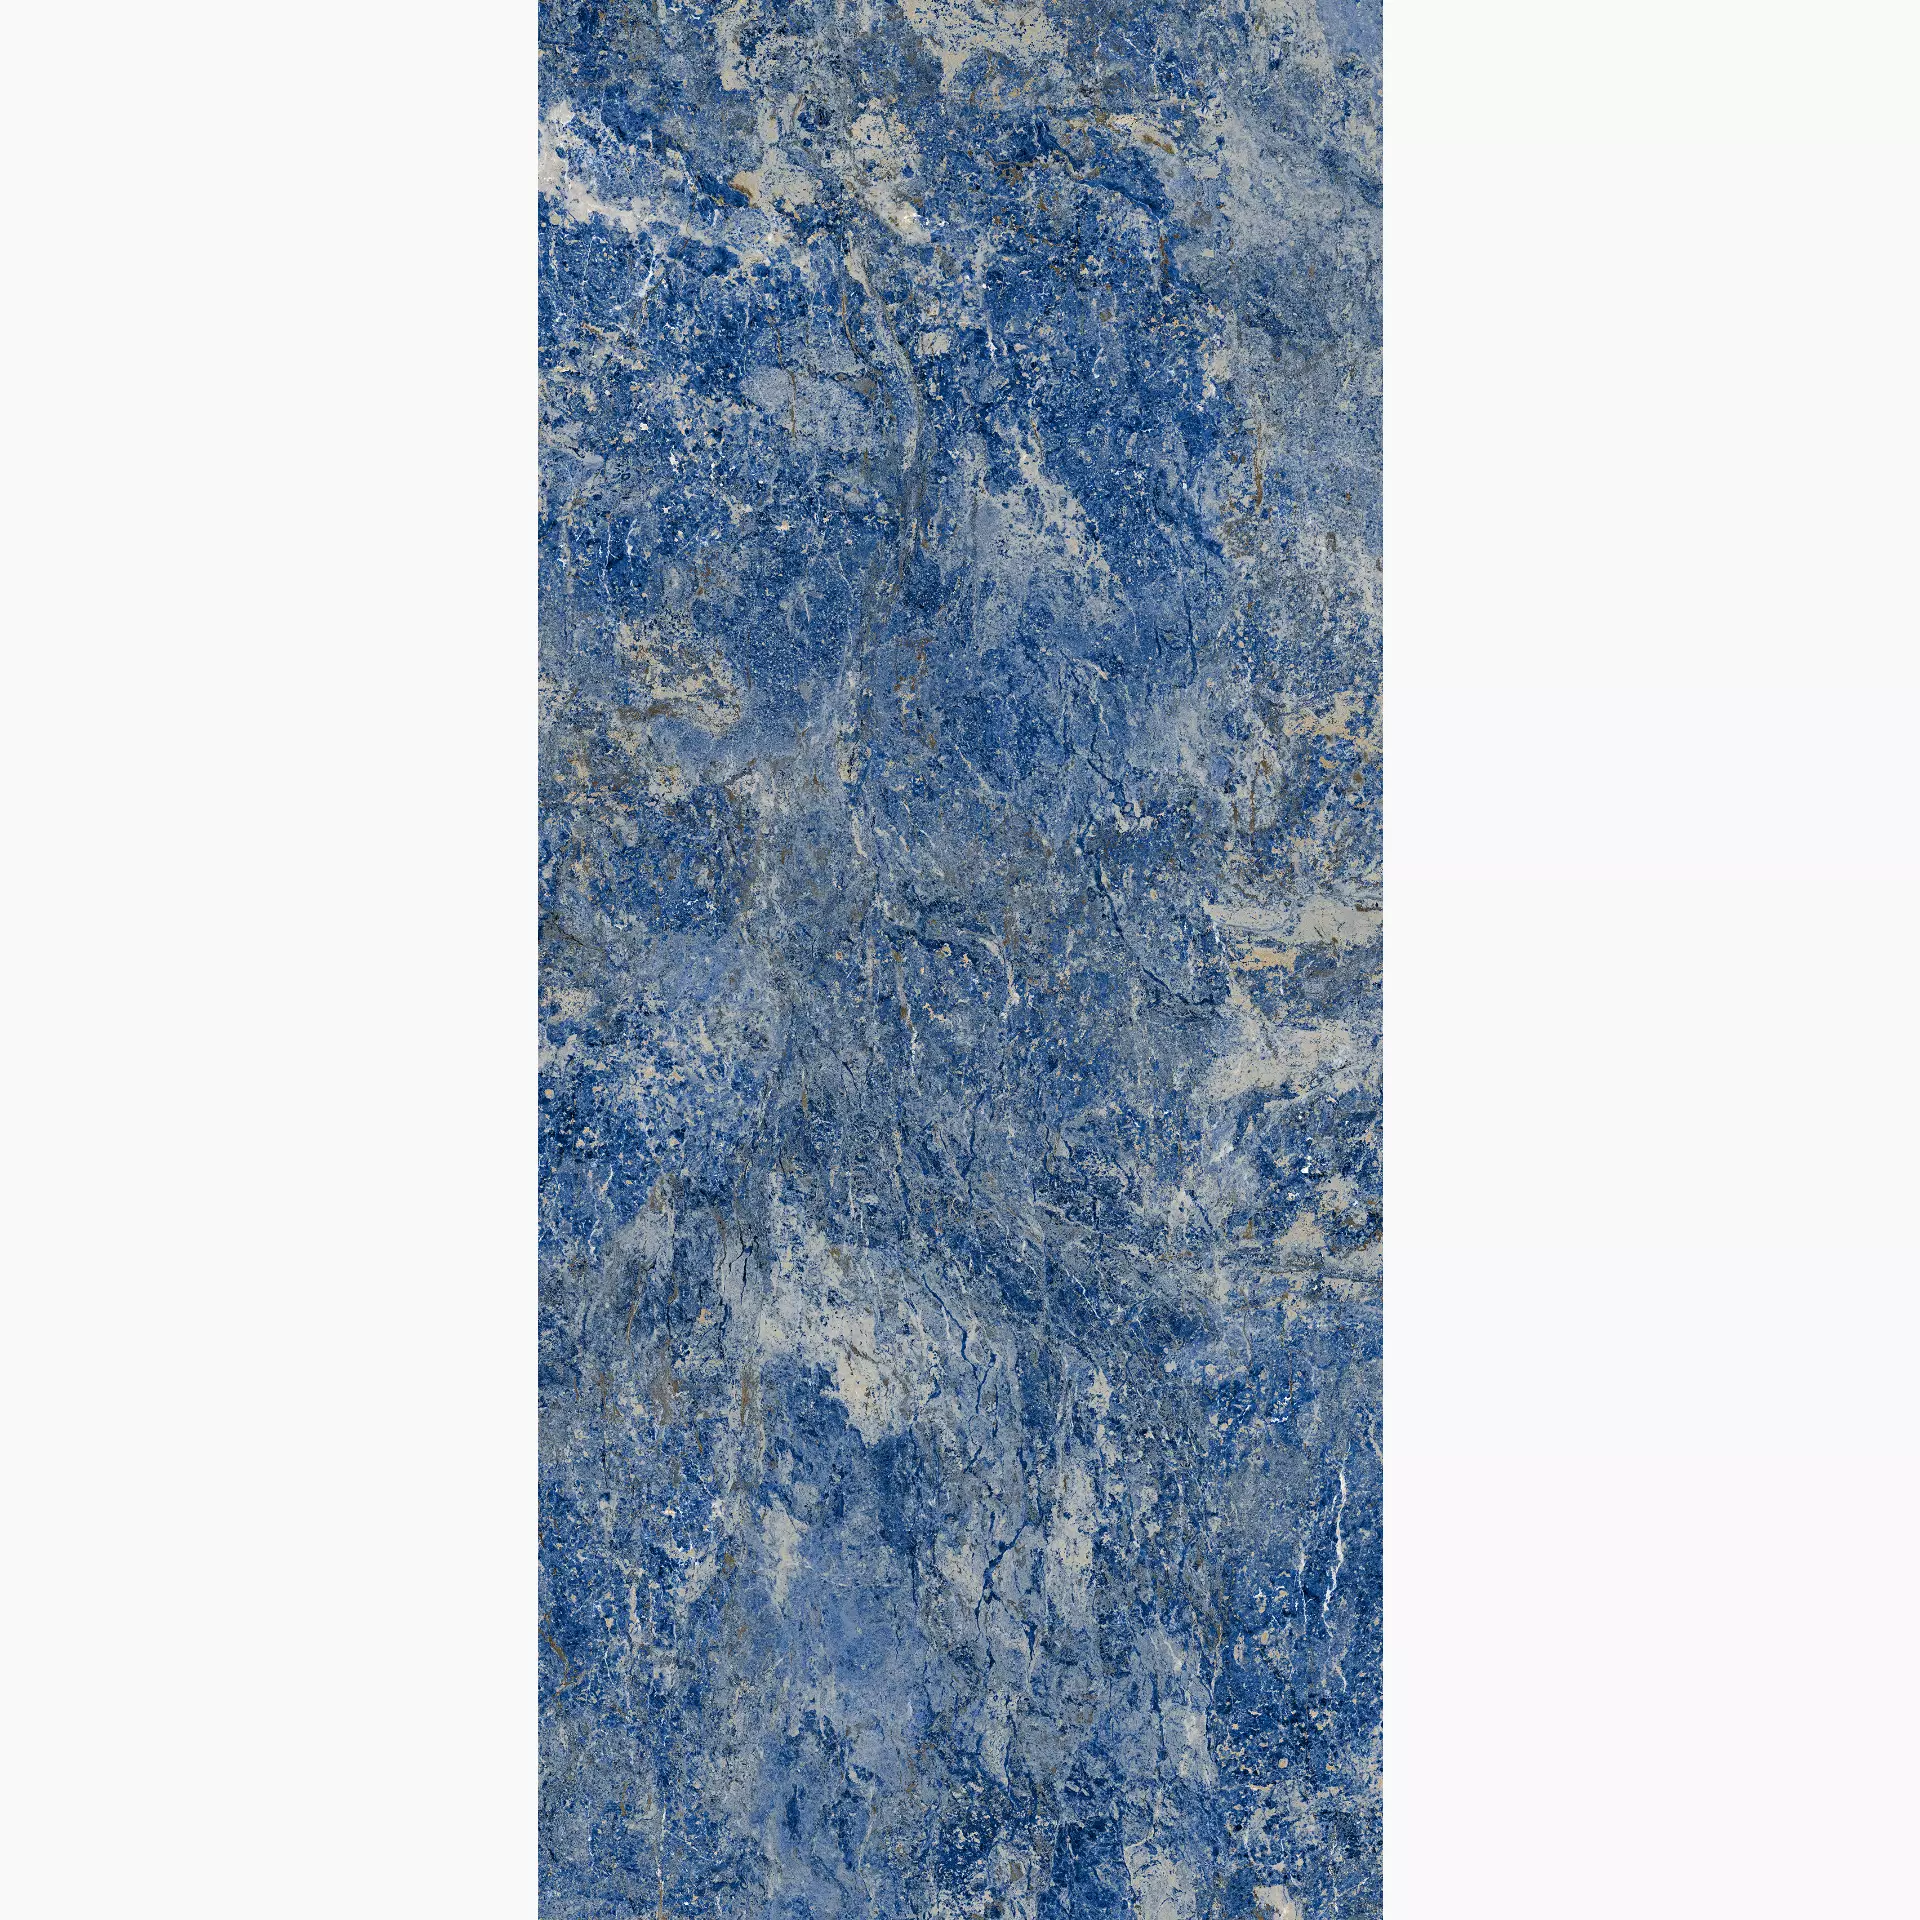 Fondovalle Infinito 2.0 Sodalite Blue Glossy INF1633 120x278cm rectified 6,5mm